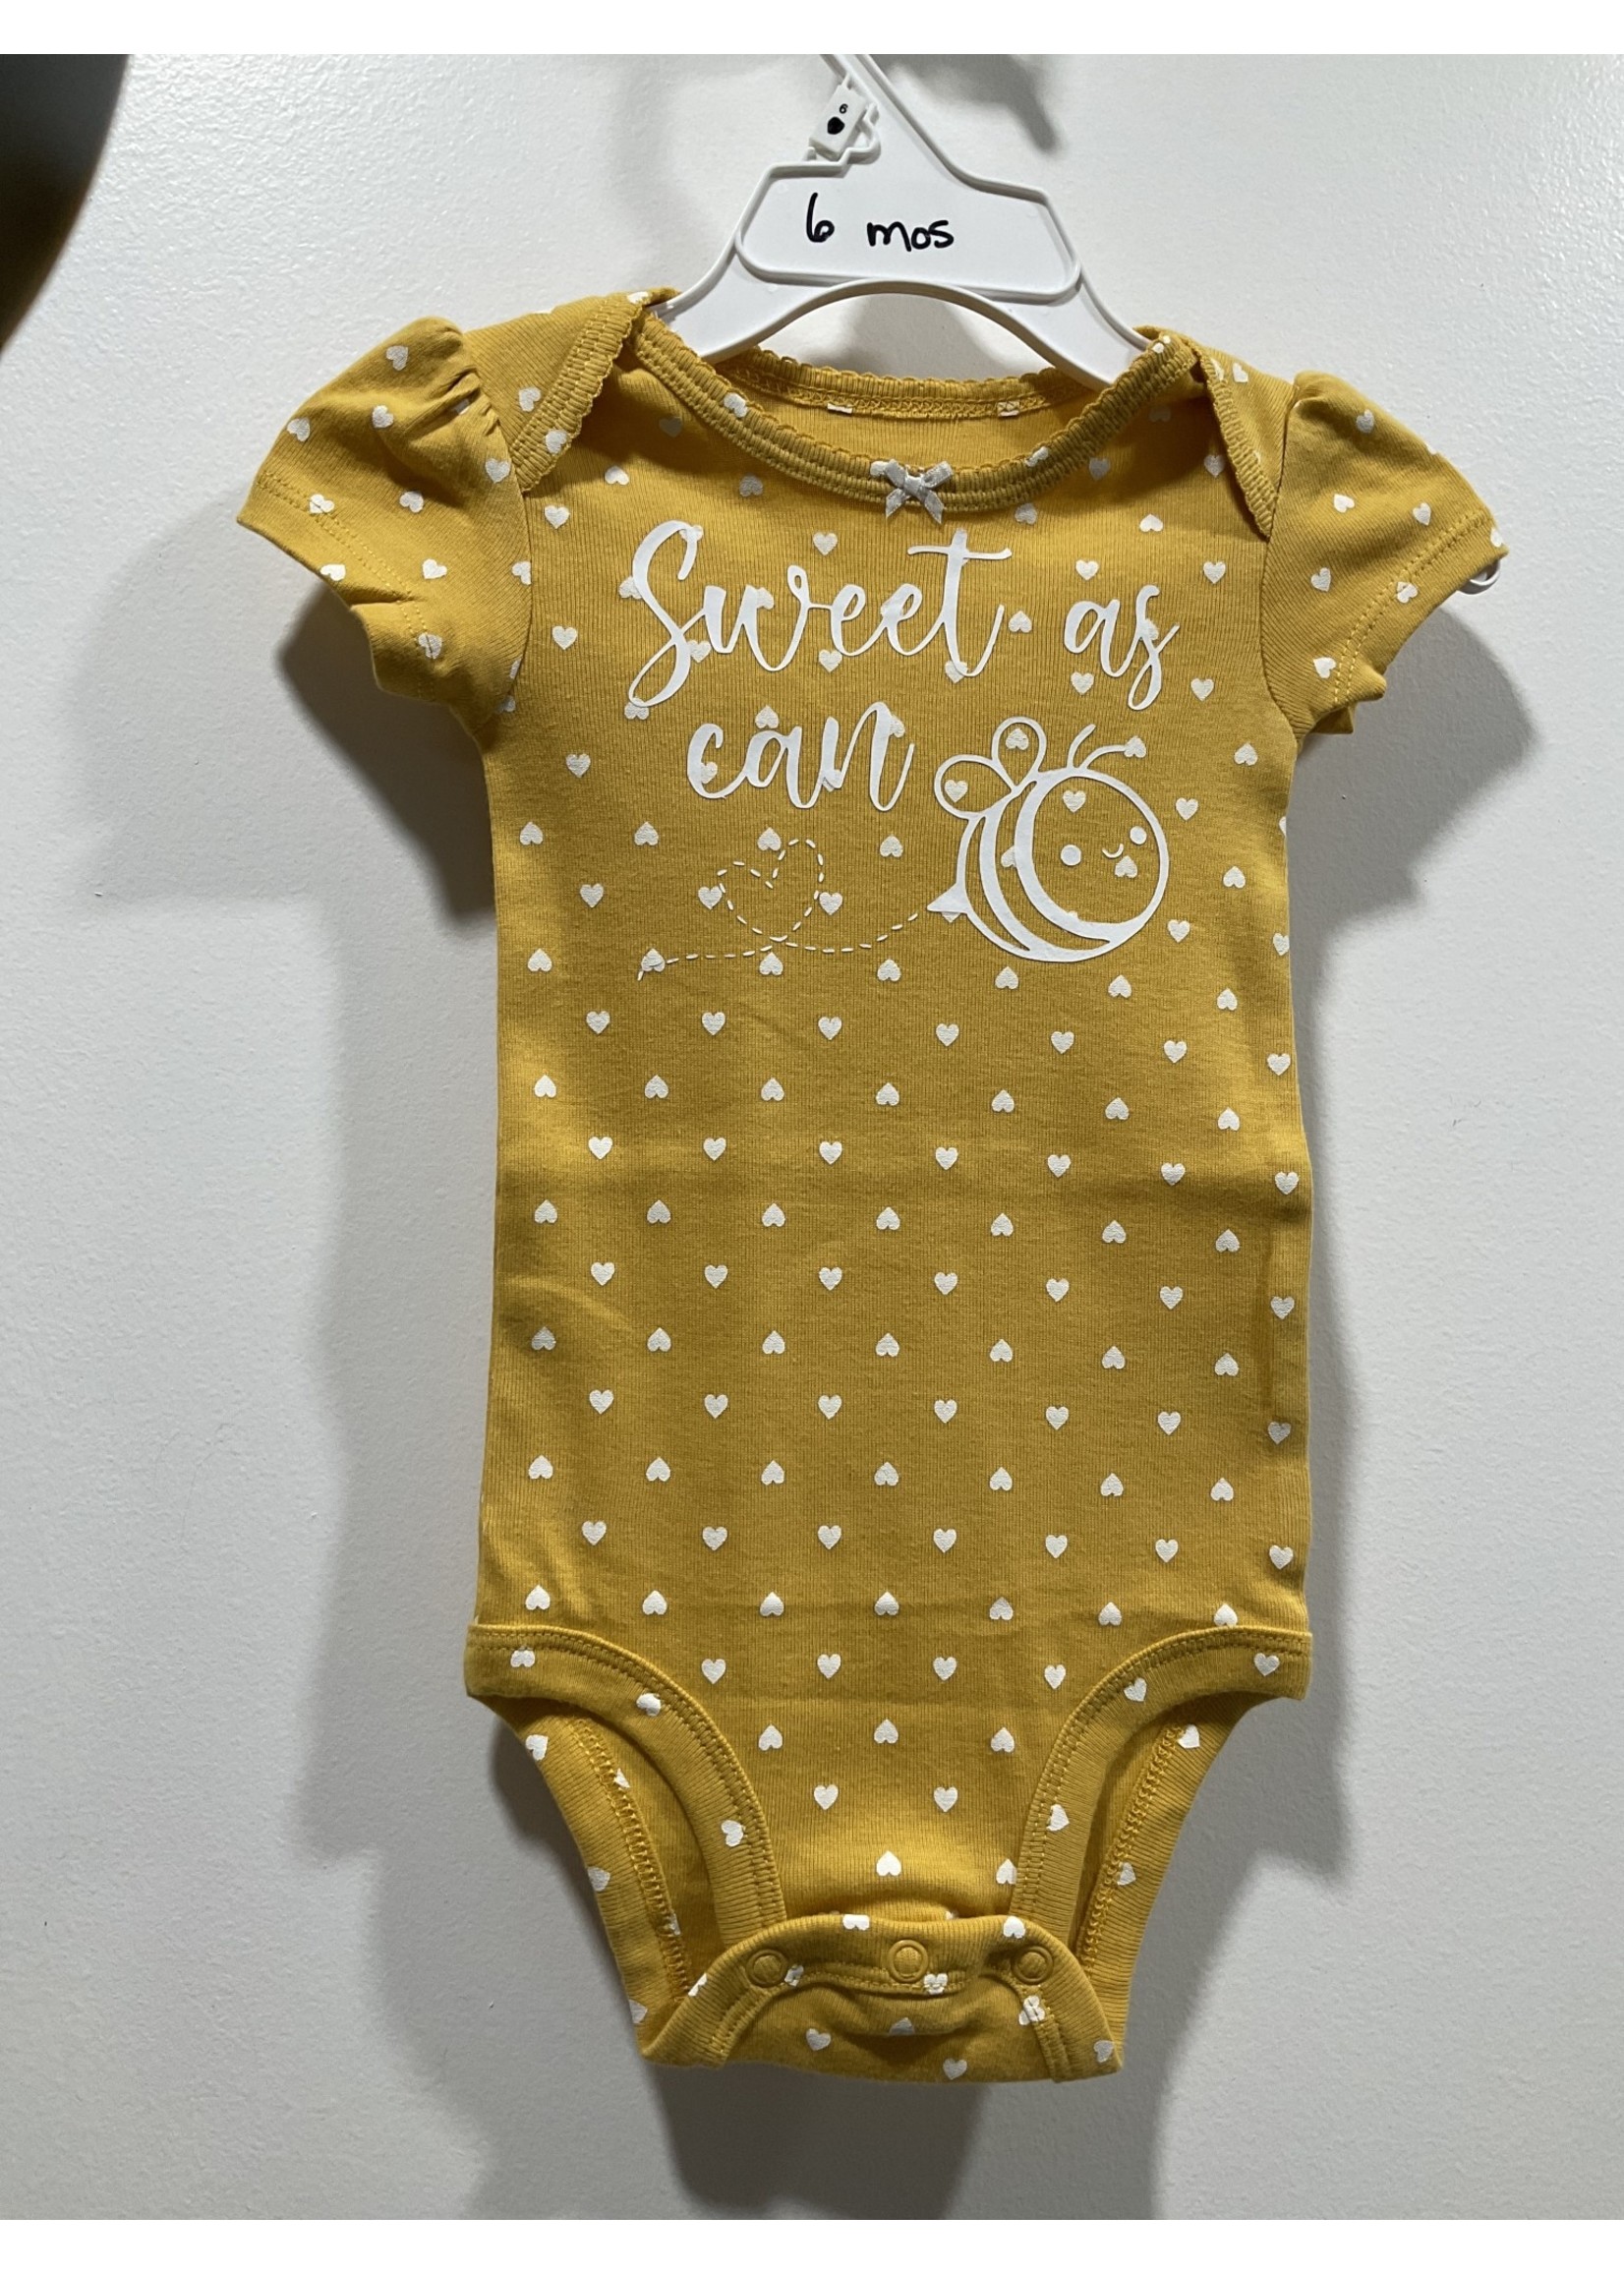 My New Favorite Thing Onsie Yellow with White Hearts w/White "Sweet as Can Bee" with a Bumble Bee short sleeve 6 month